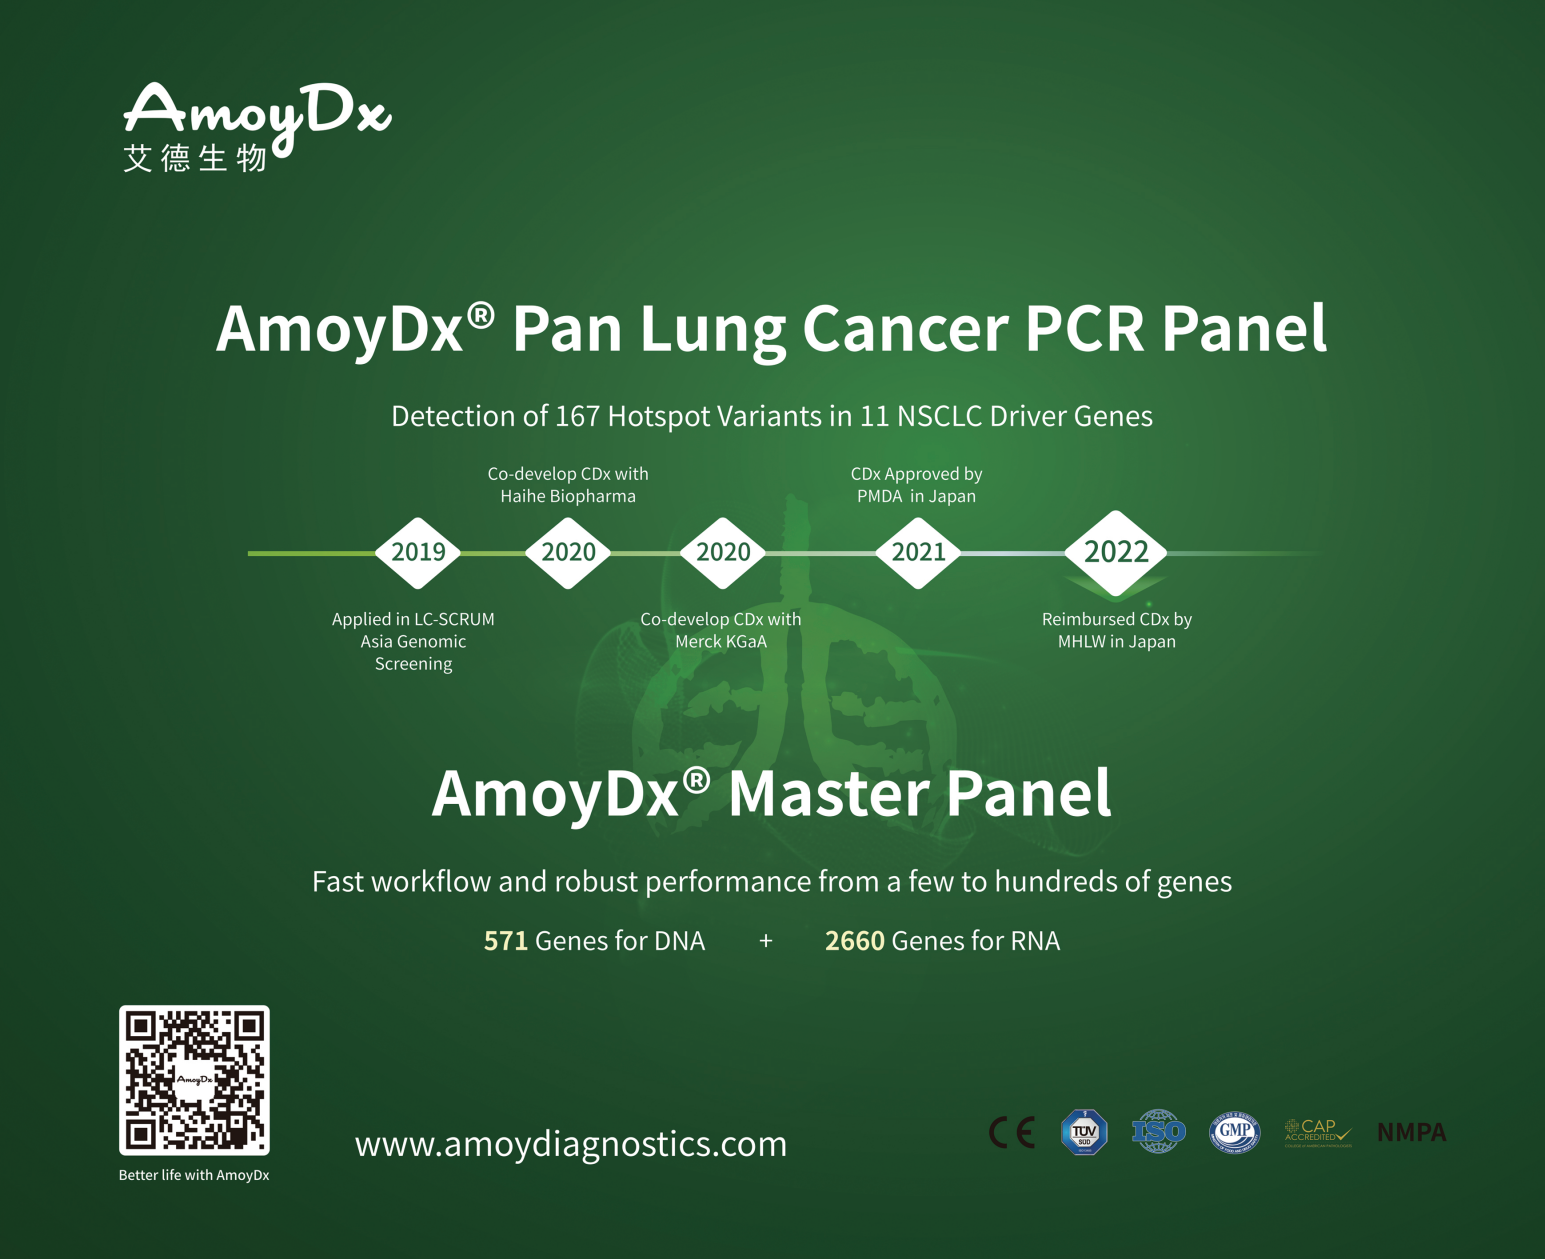 Visit AmoyDx at IASLC 2022 World Conference on Lung Cancer in Vienna, Austria from August 6 – 9,